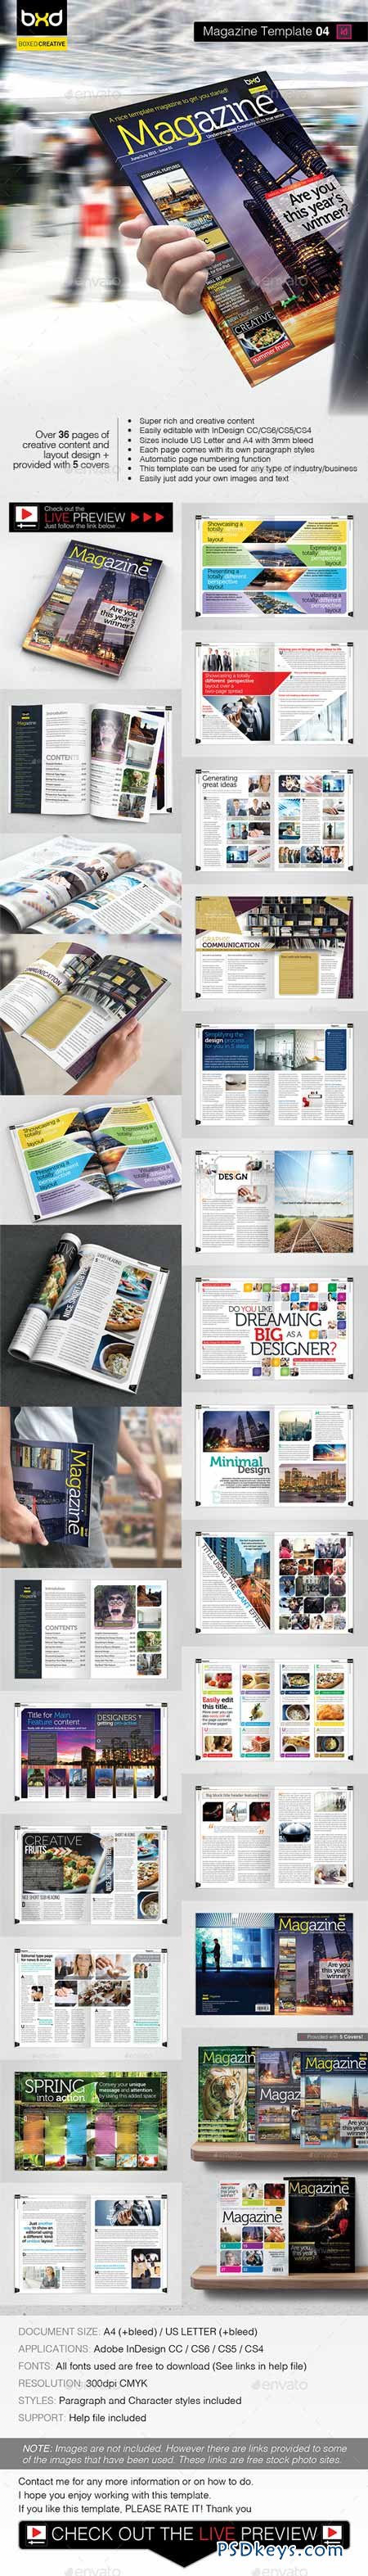 Magazine Template - InDesign 36 Page Layout V1 427849